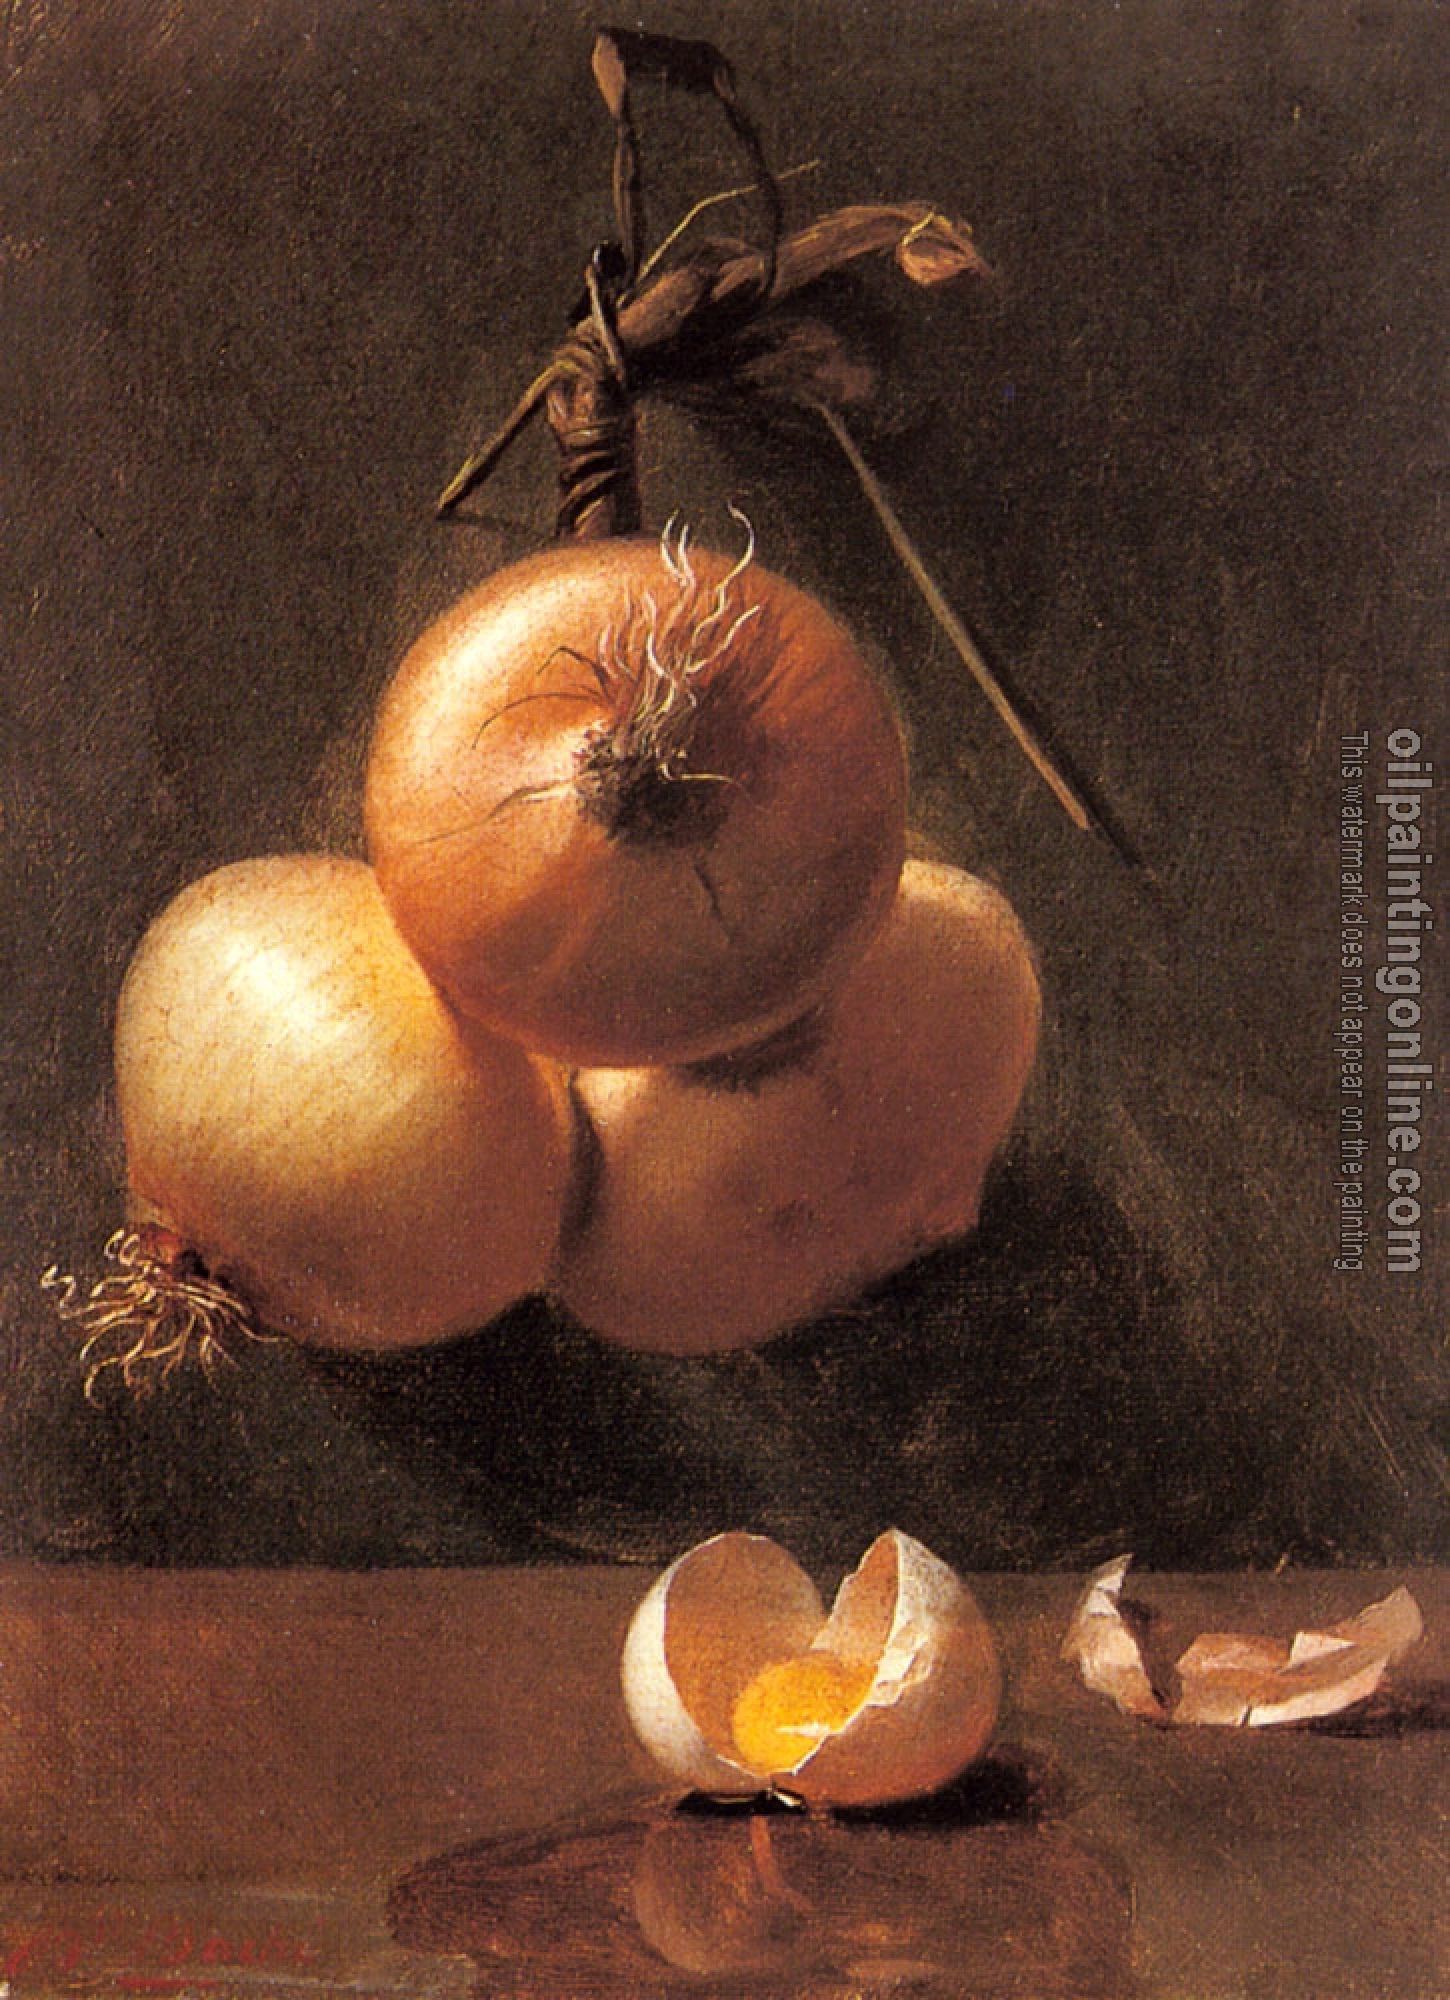 Bache, Berta - A Still Life with Onions and a Cracked Egg